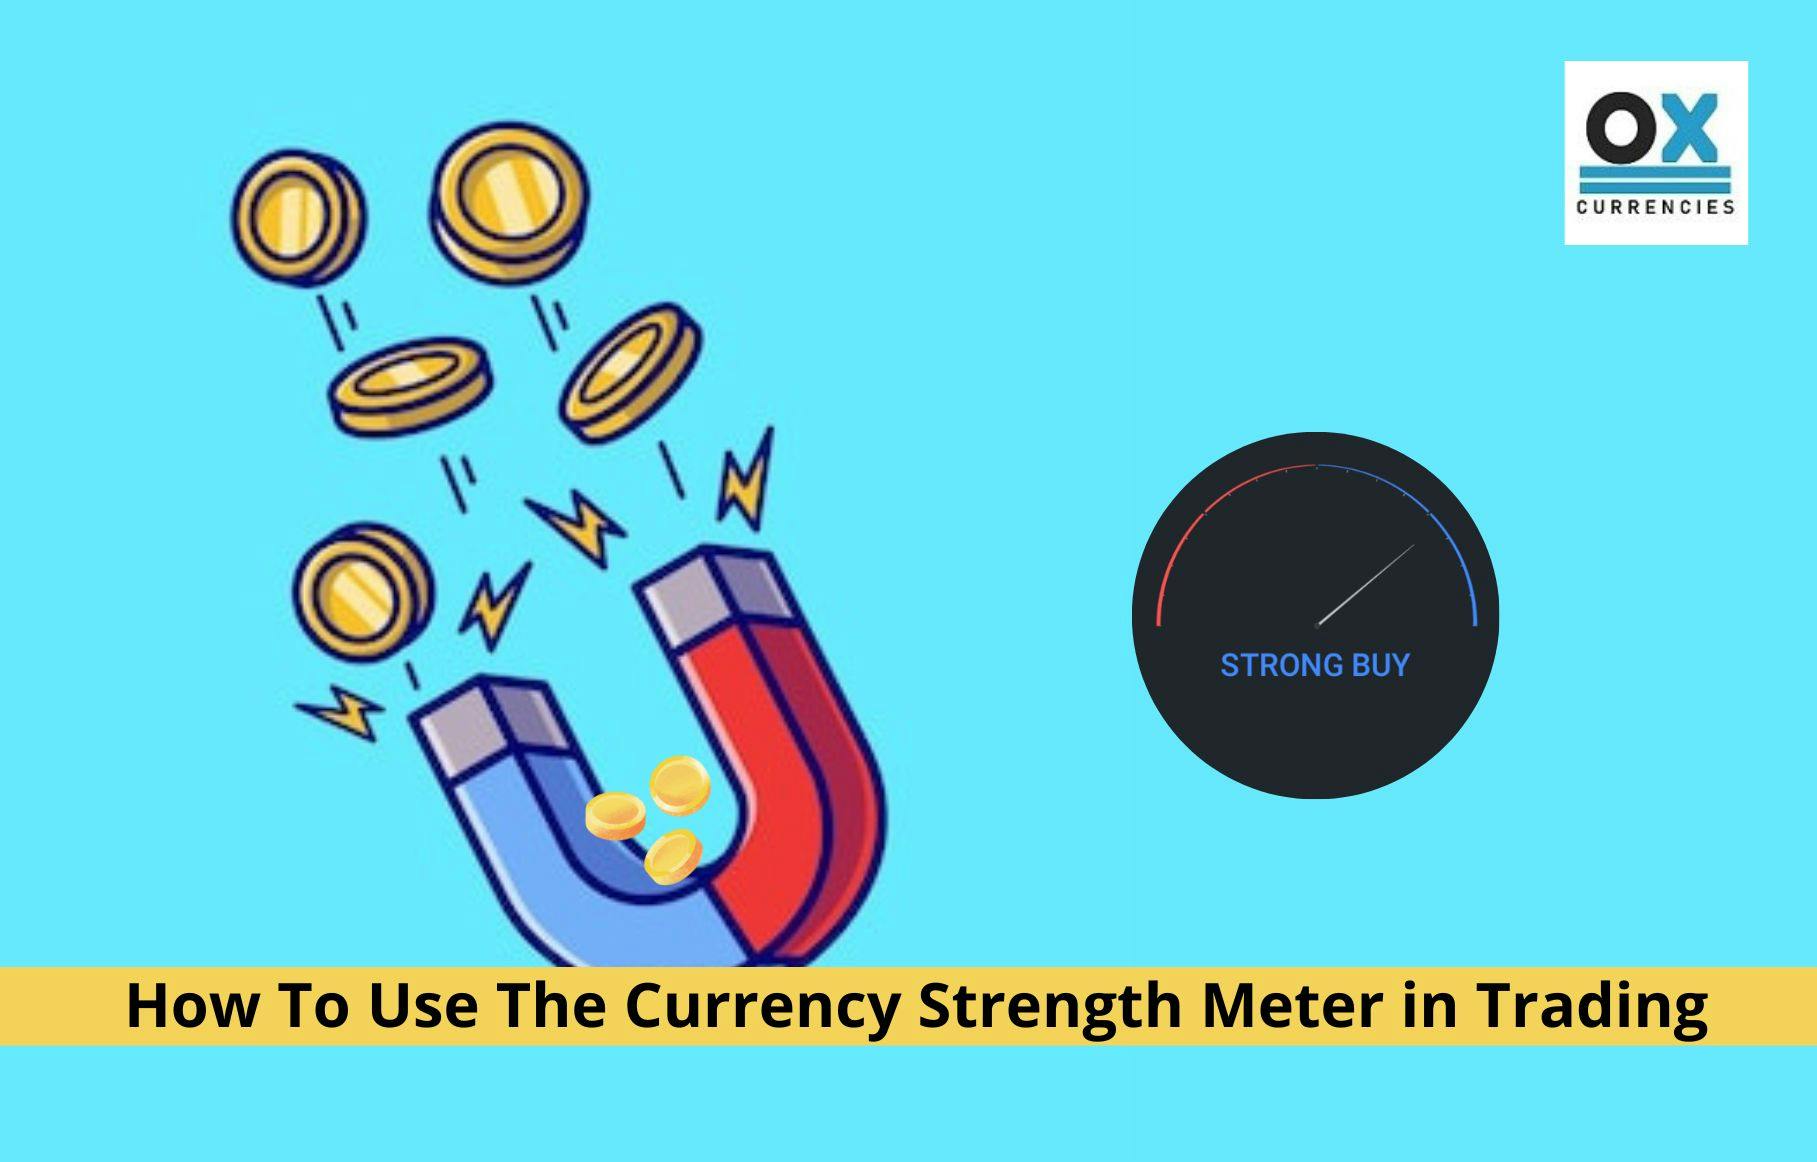 How To Use The Currency Strength Meter in Trading